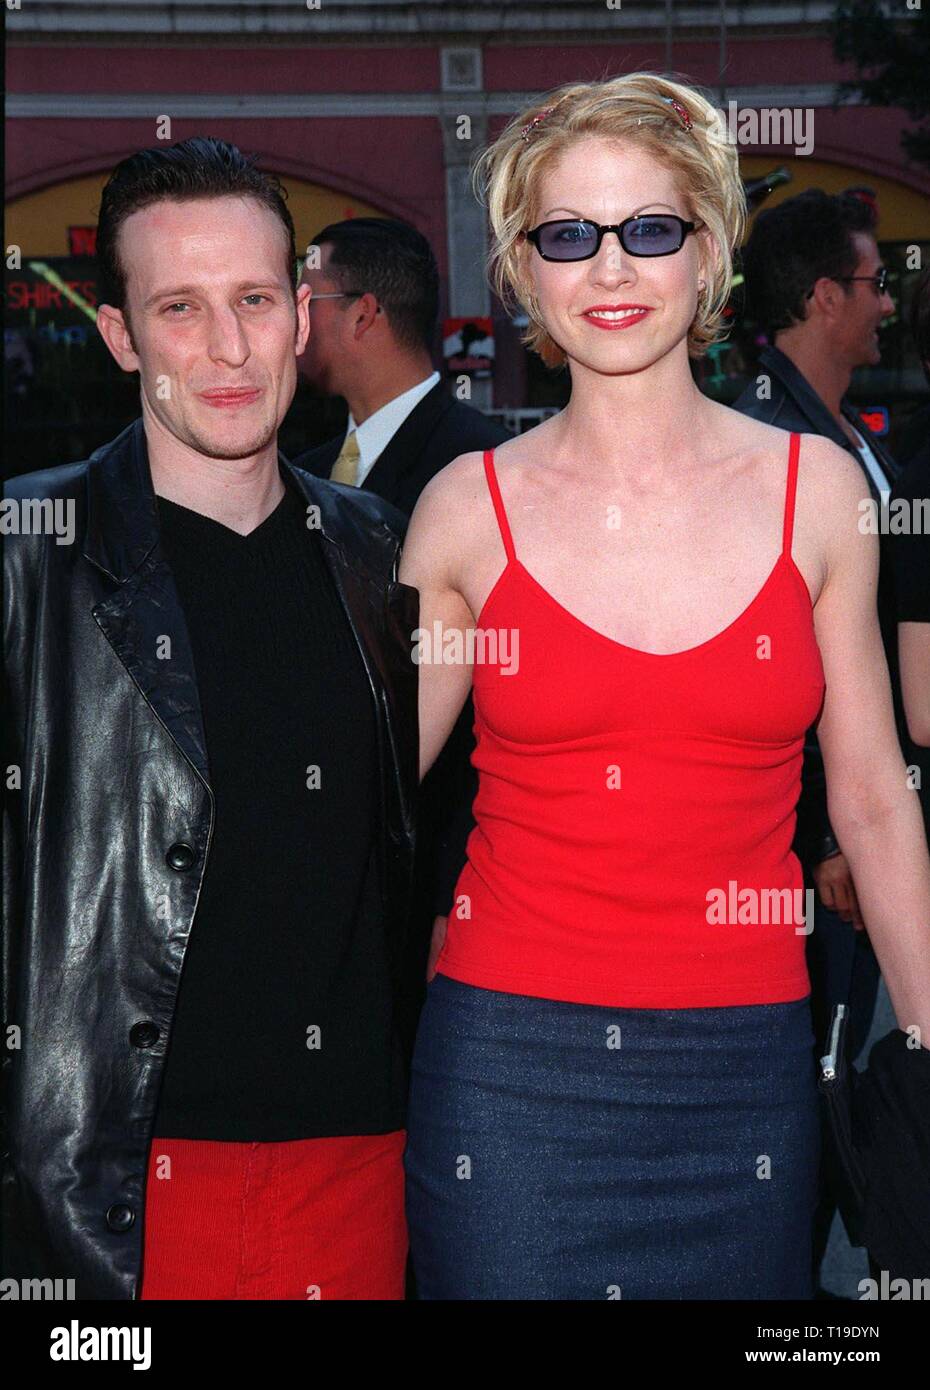 LOS ANGELES, CA - March 15, 1998: 'Dharma & Greg' star JENNA ELFMAN & husband Bodhi Elfman at 20th anniversary re-premiere of 'Grease' at Mann's Chinese Theatre, Hollywood. Stock Photo